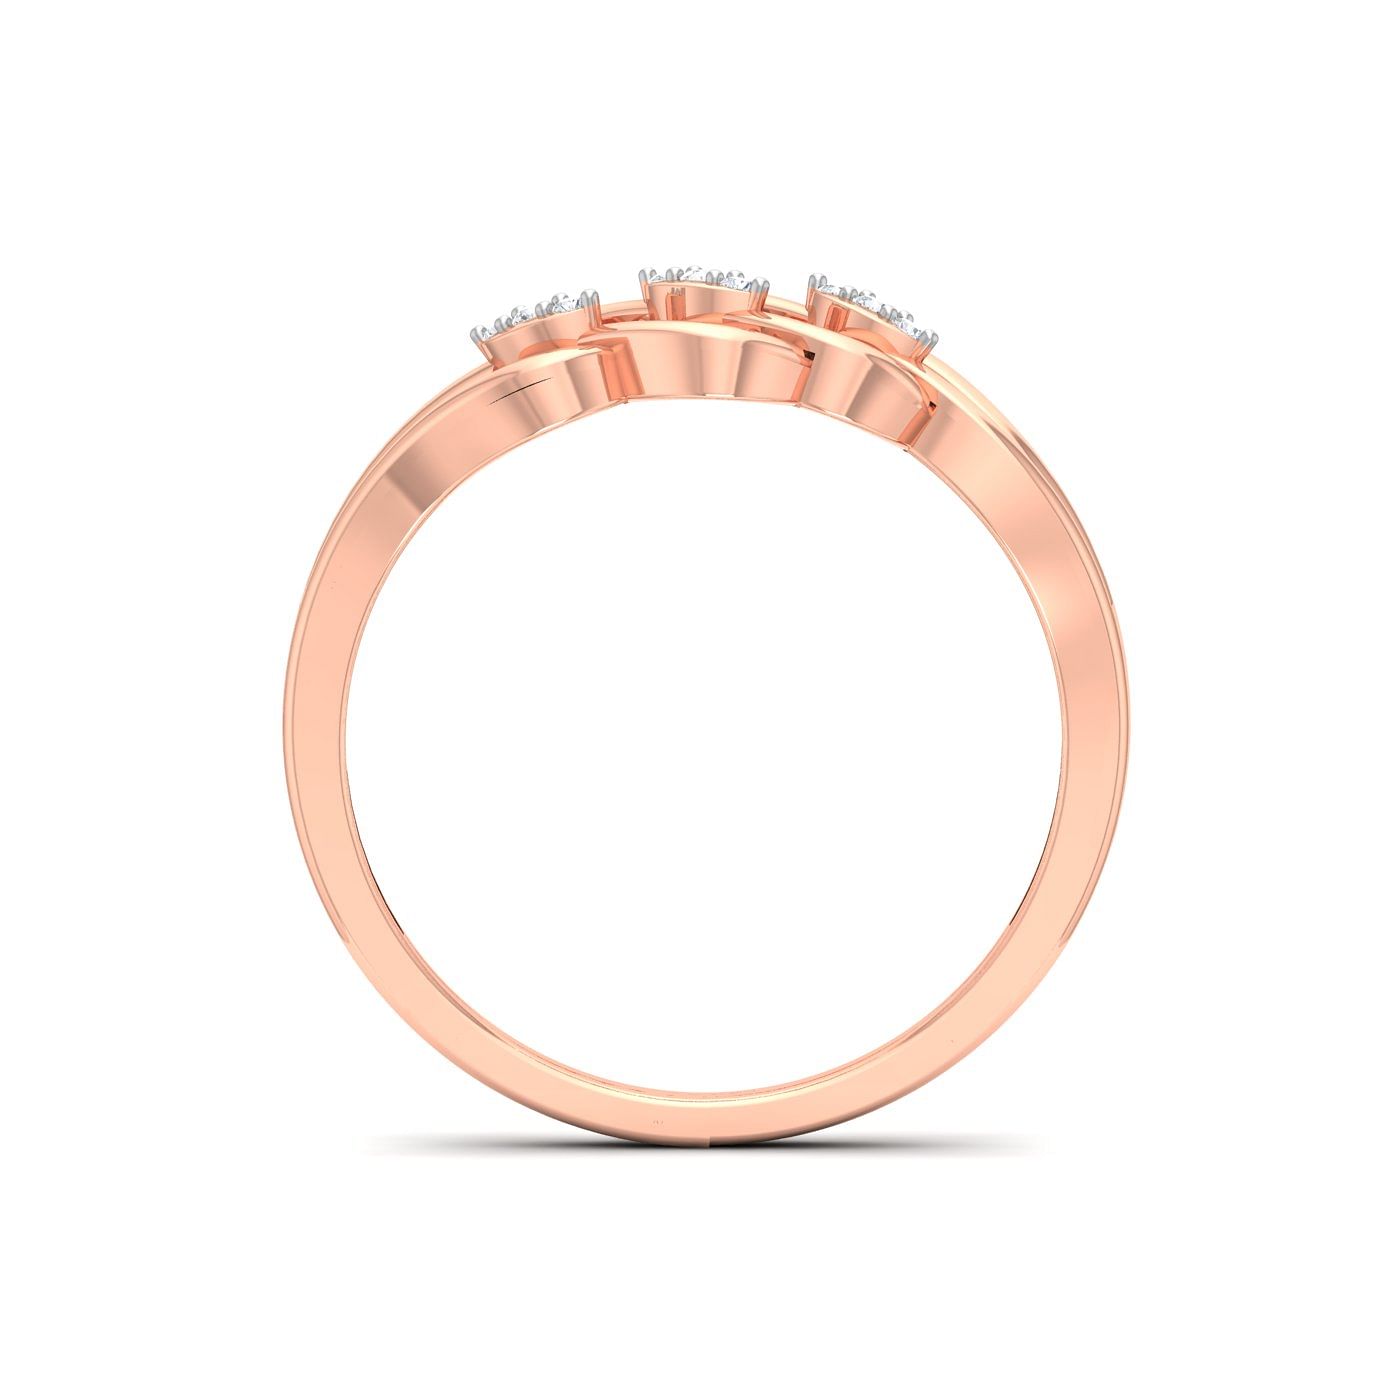 rose gold ring designs latest